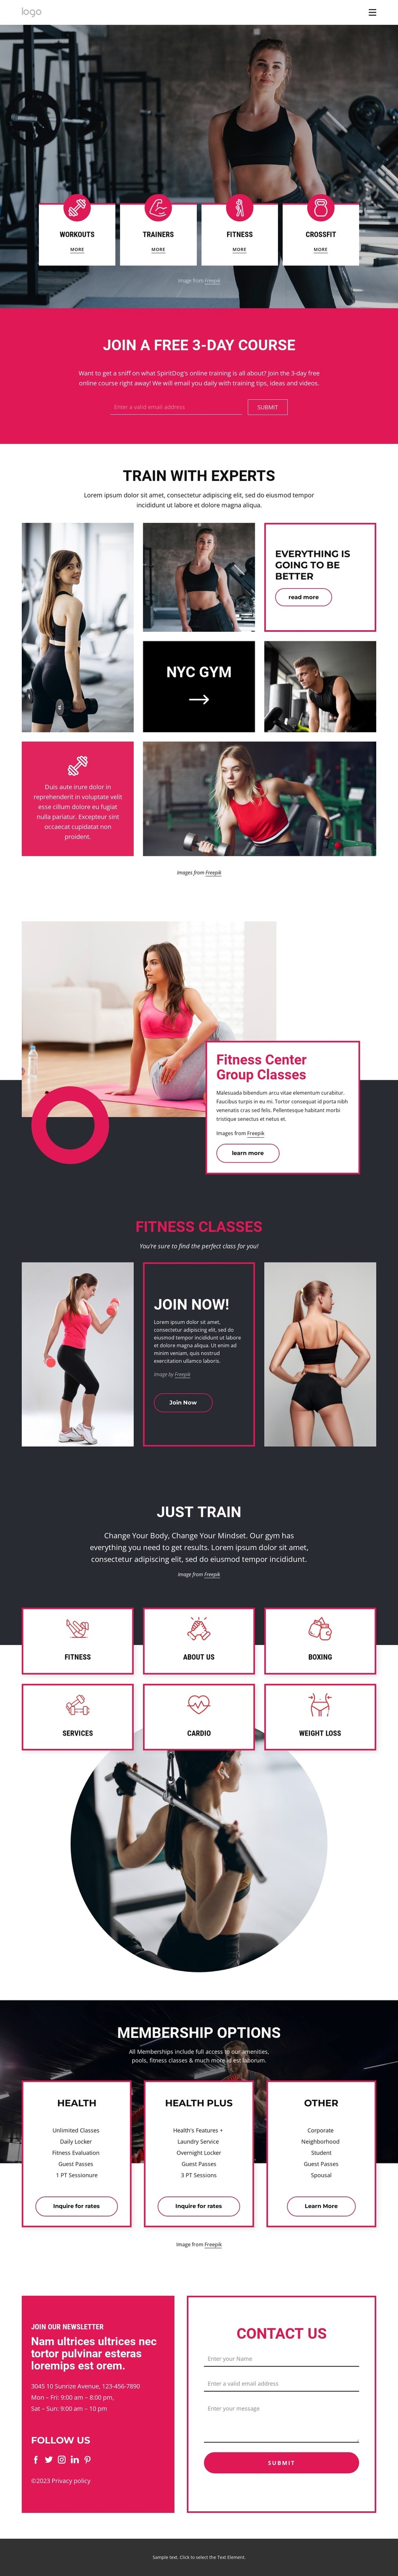 Join a Crossfit gym Joomla Template